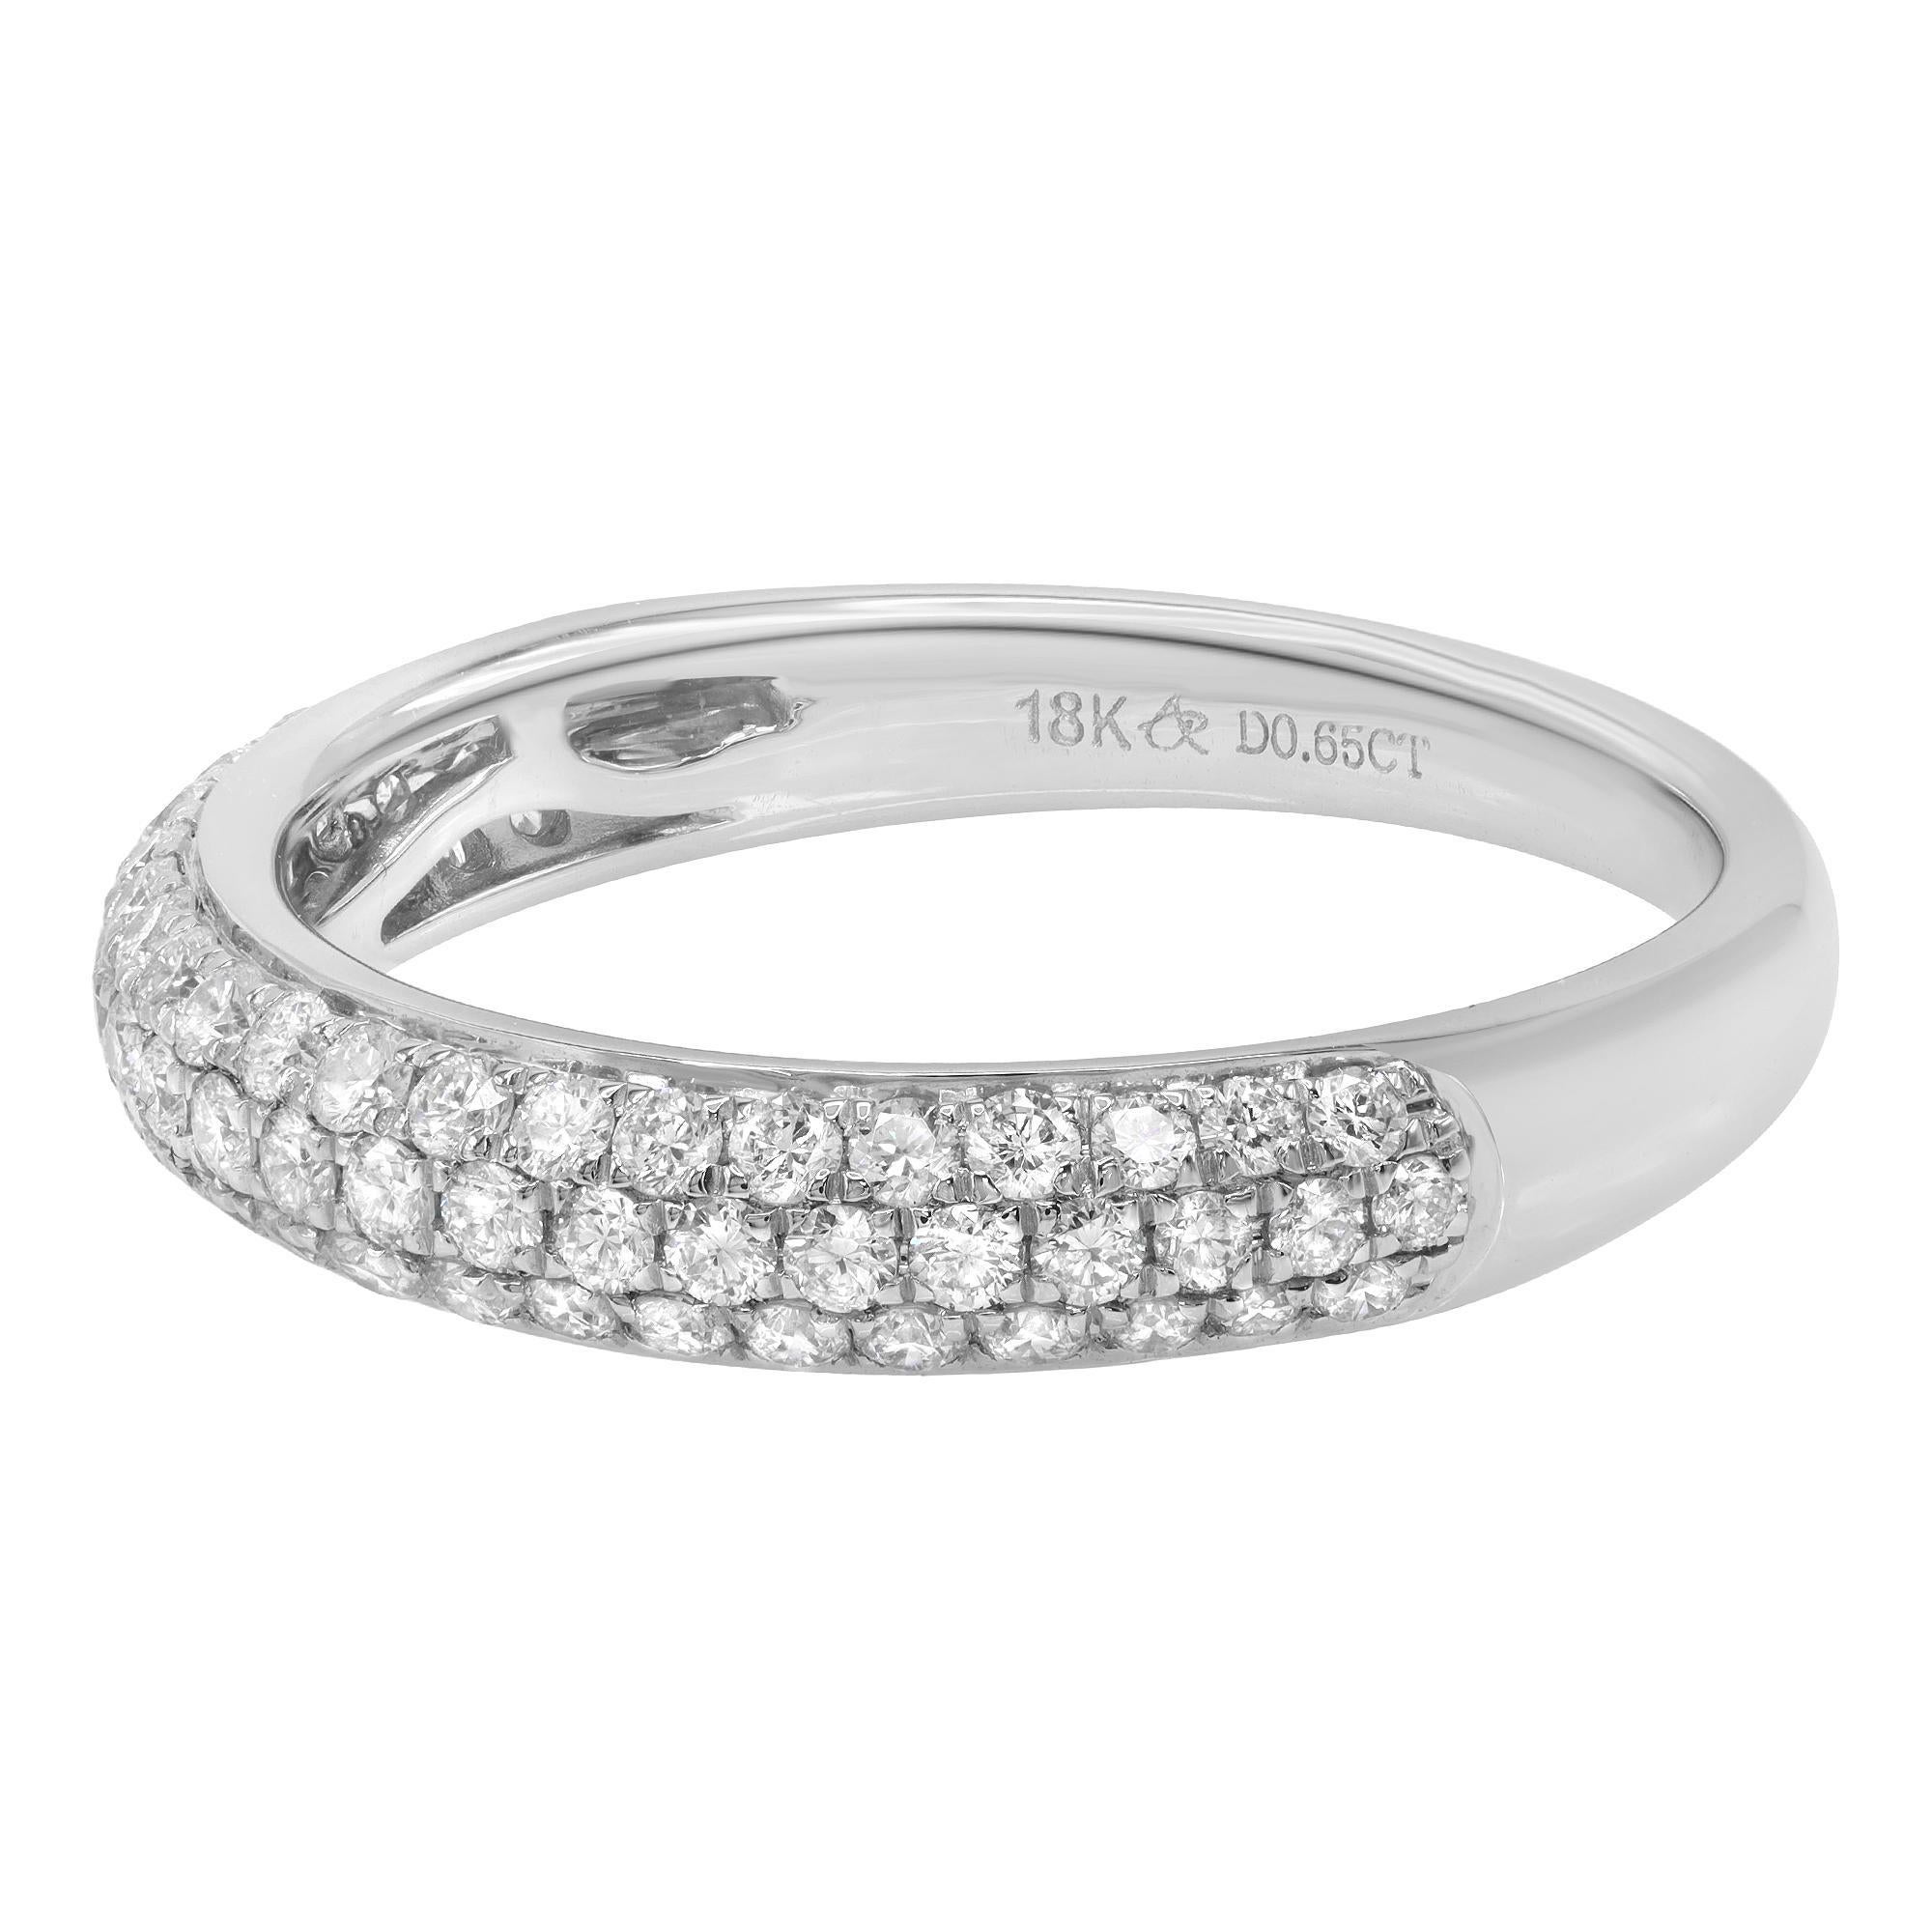 This stylish diamond band features three rows of round brilliant pave-set diamonds. Currently priced with diamonds going half way around the band, totaling 0.65cttw. Diamond color I and SI-I clarity. The ring is crafted in 18k white gold. Ring size